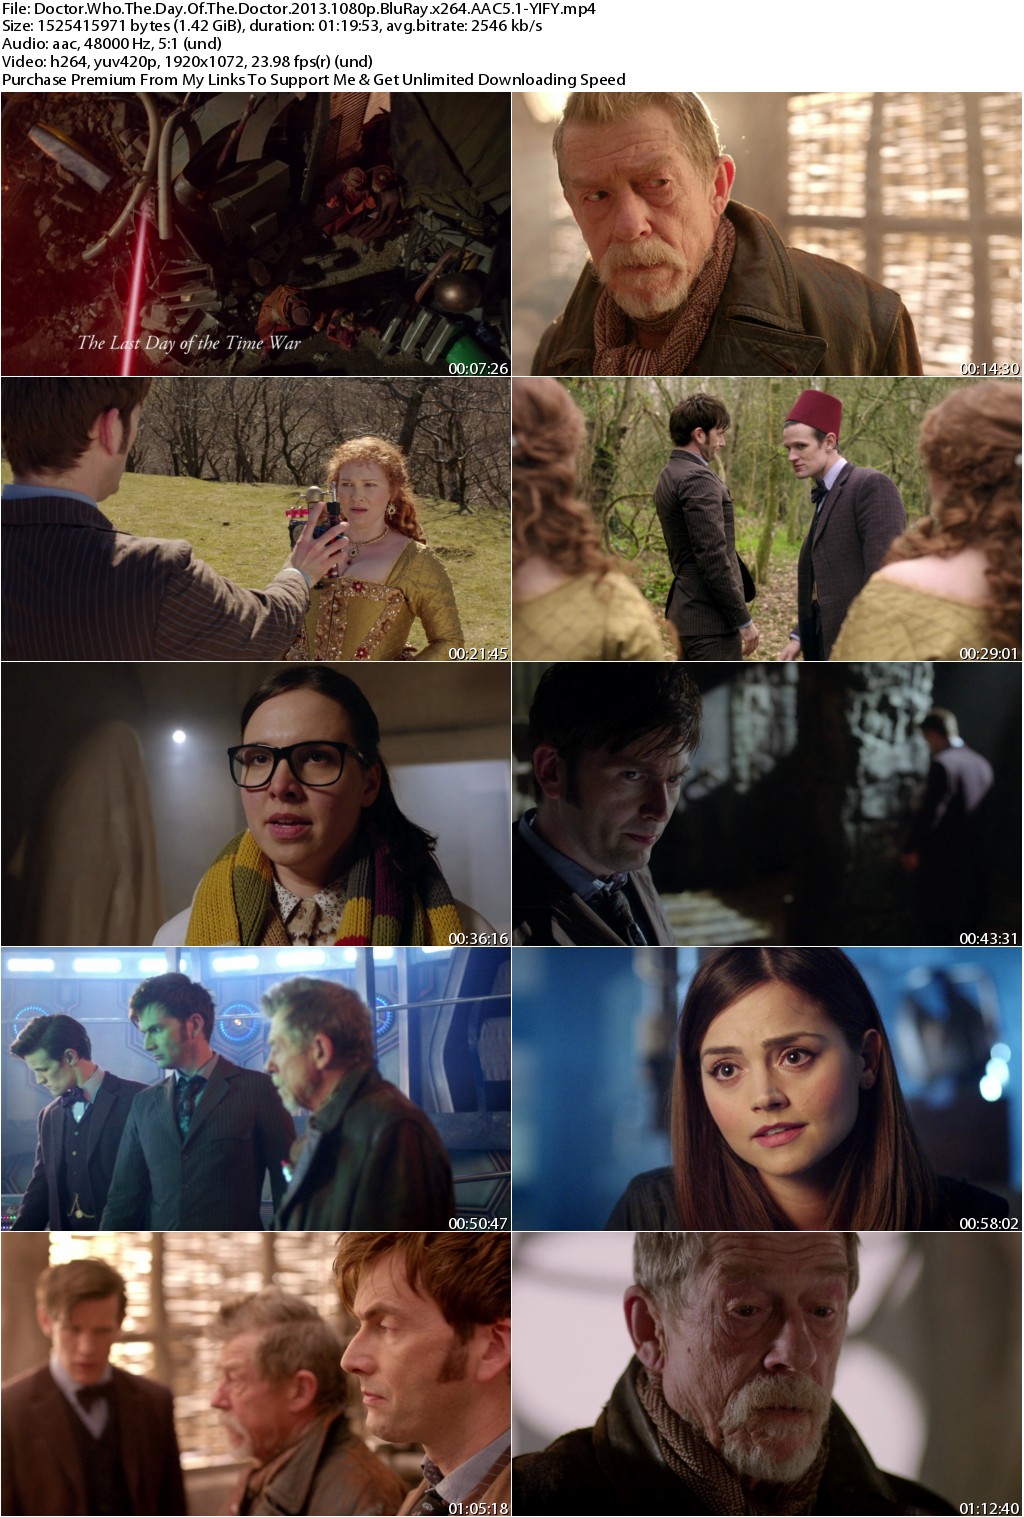 Doctor Who The Day Of The Doctor (2013) 1080p BluRay x264 AAC5.1-YIFY